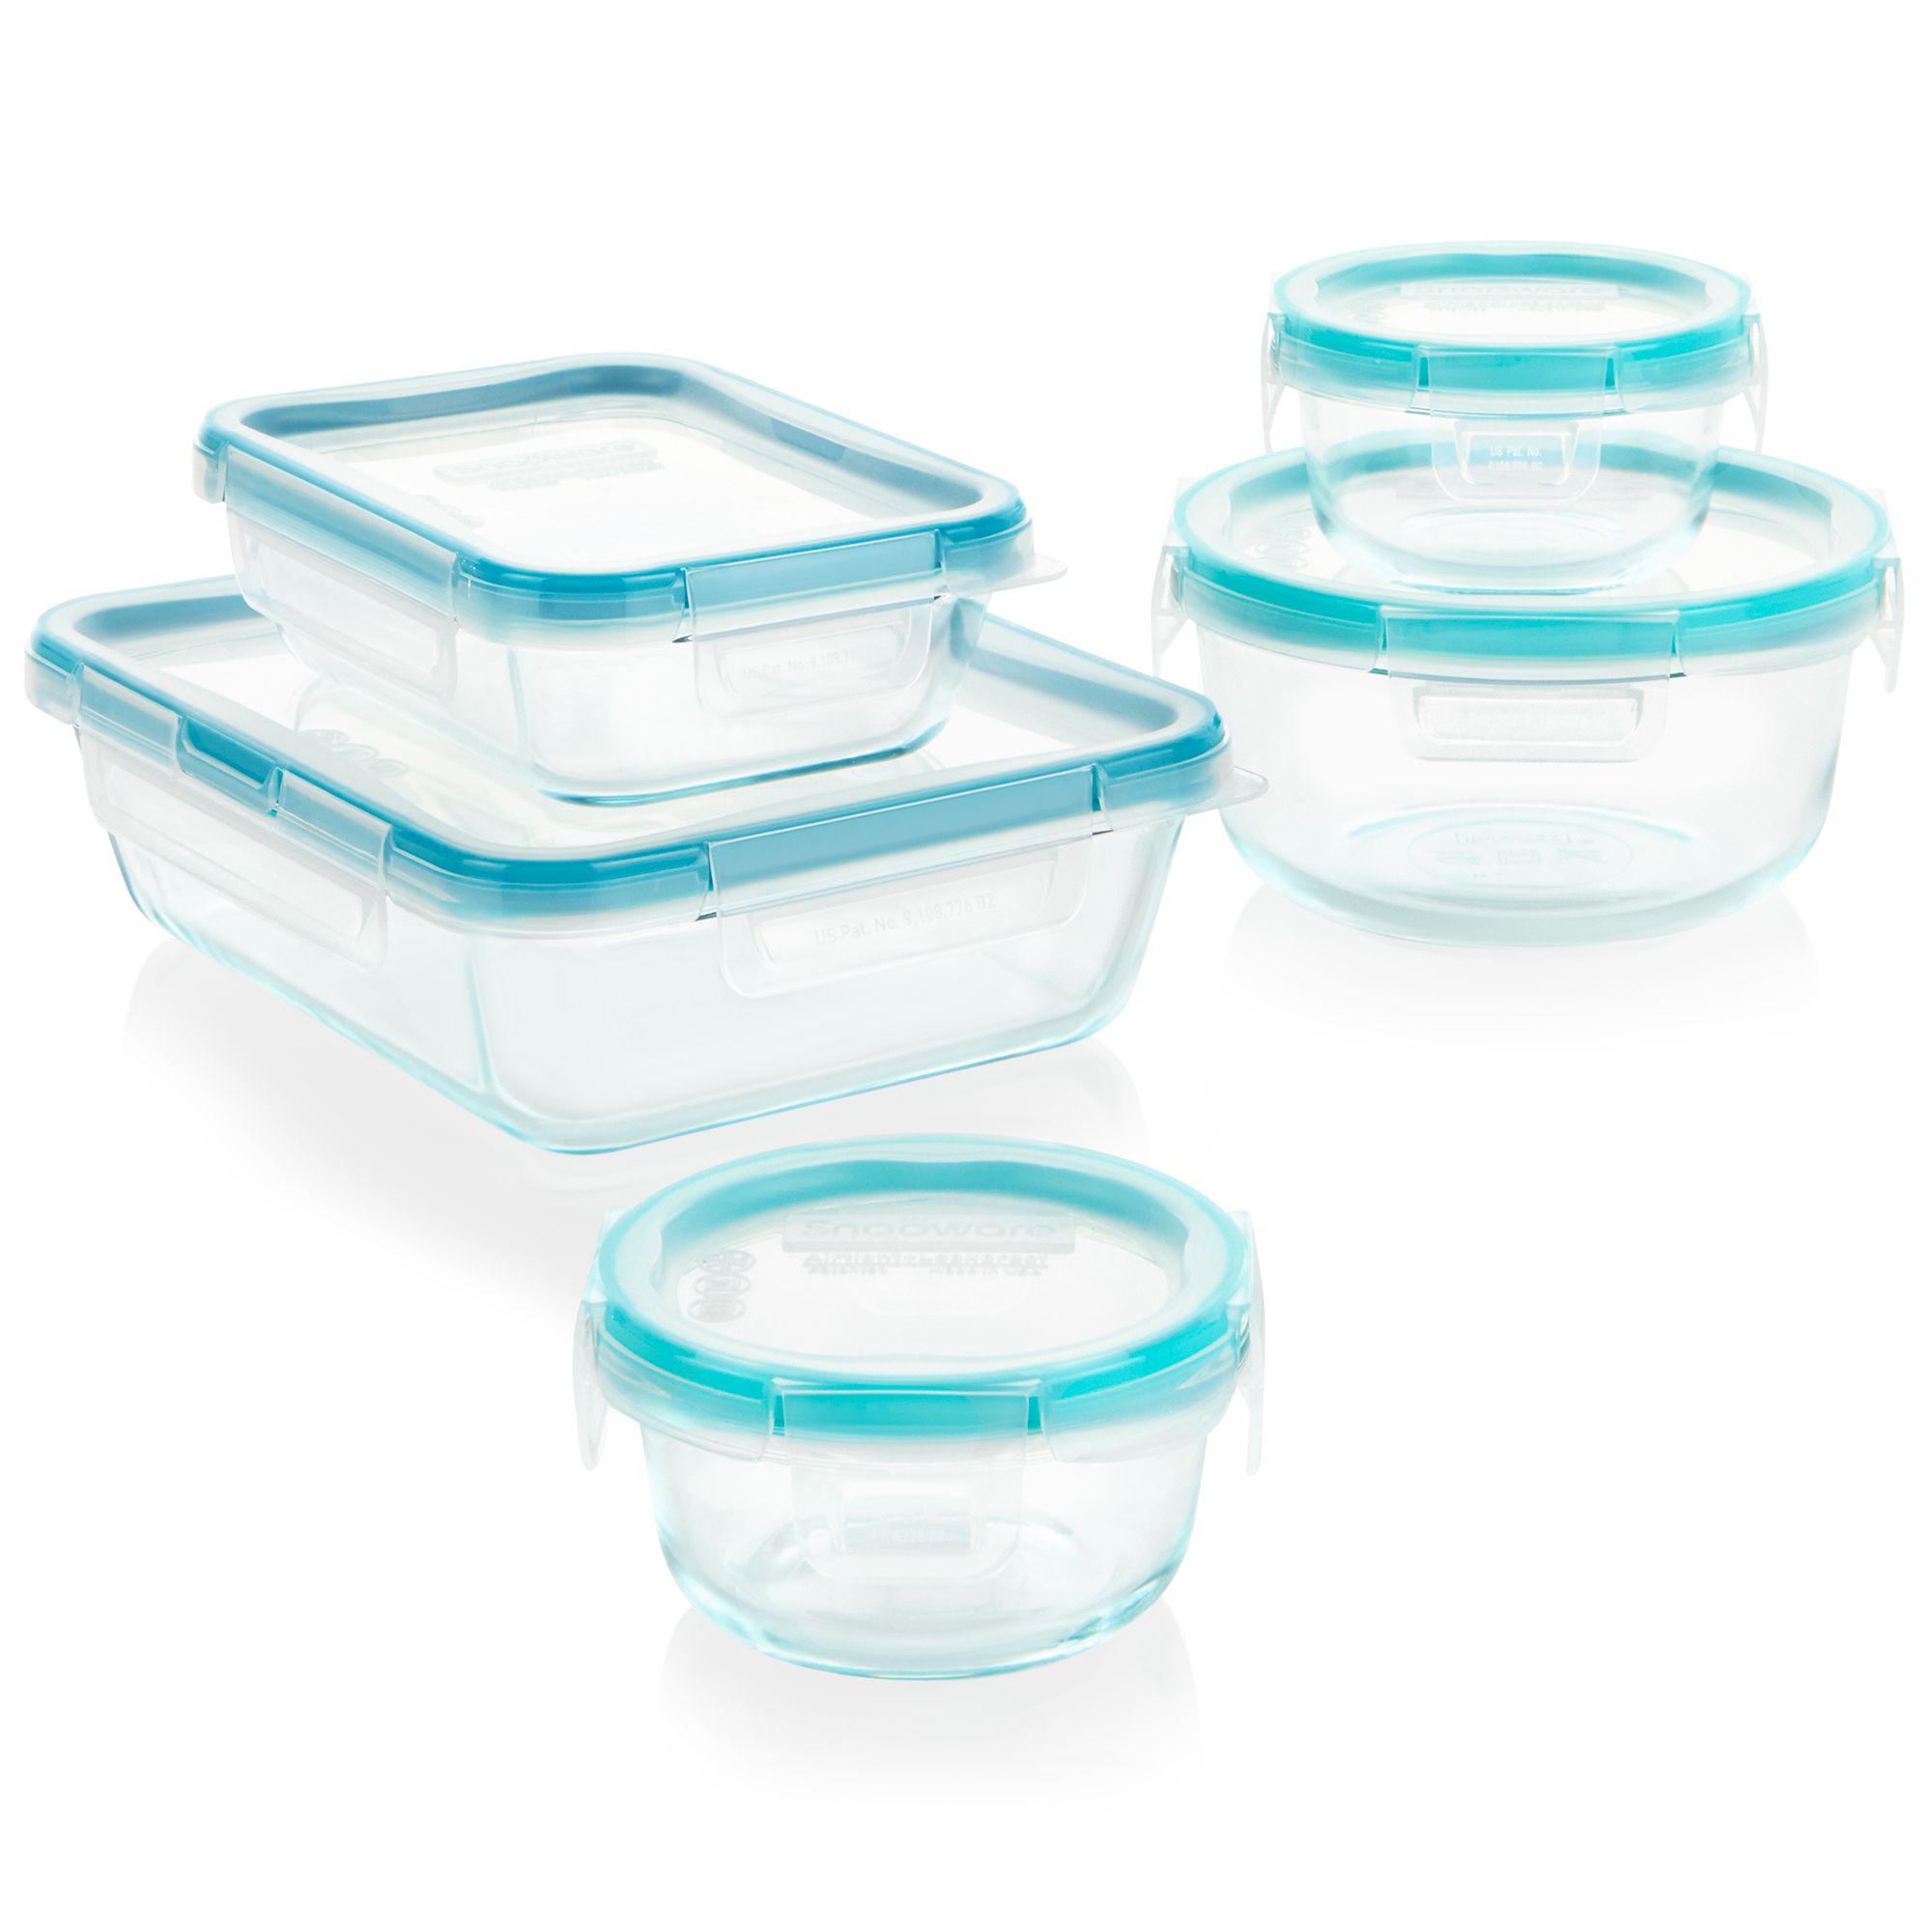 Snapware Total Solution Glass Food Storage with Lid, 4 Cups - image 5 of 12